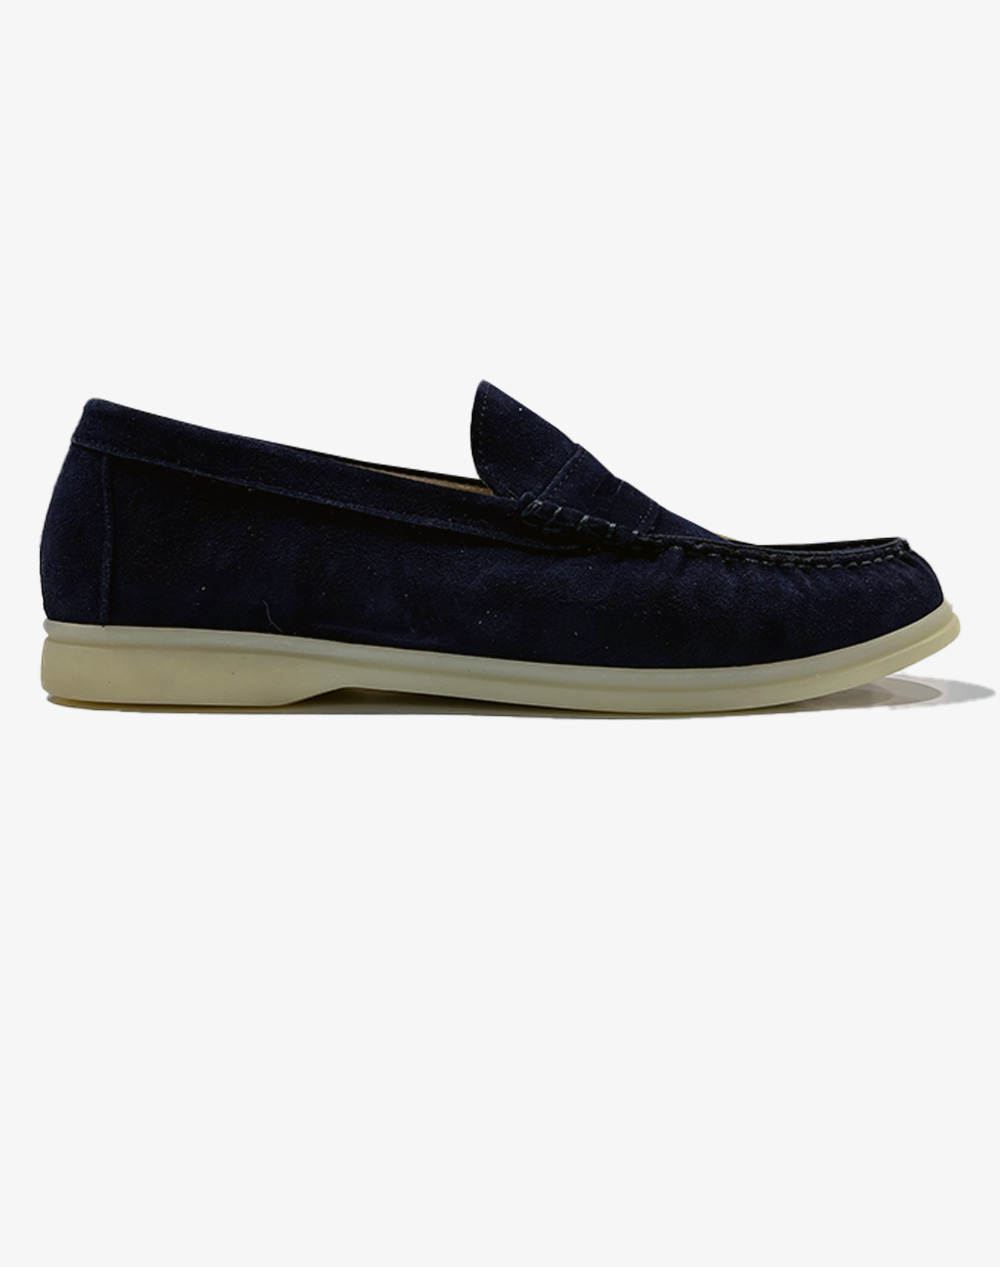 CHICAGO SHOES 124-5.0947-831-NAVY SUEDE NavyBlue 3820PCHIC6000006_XR31111